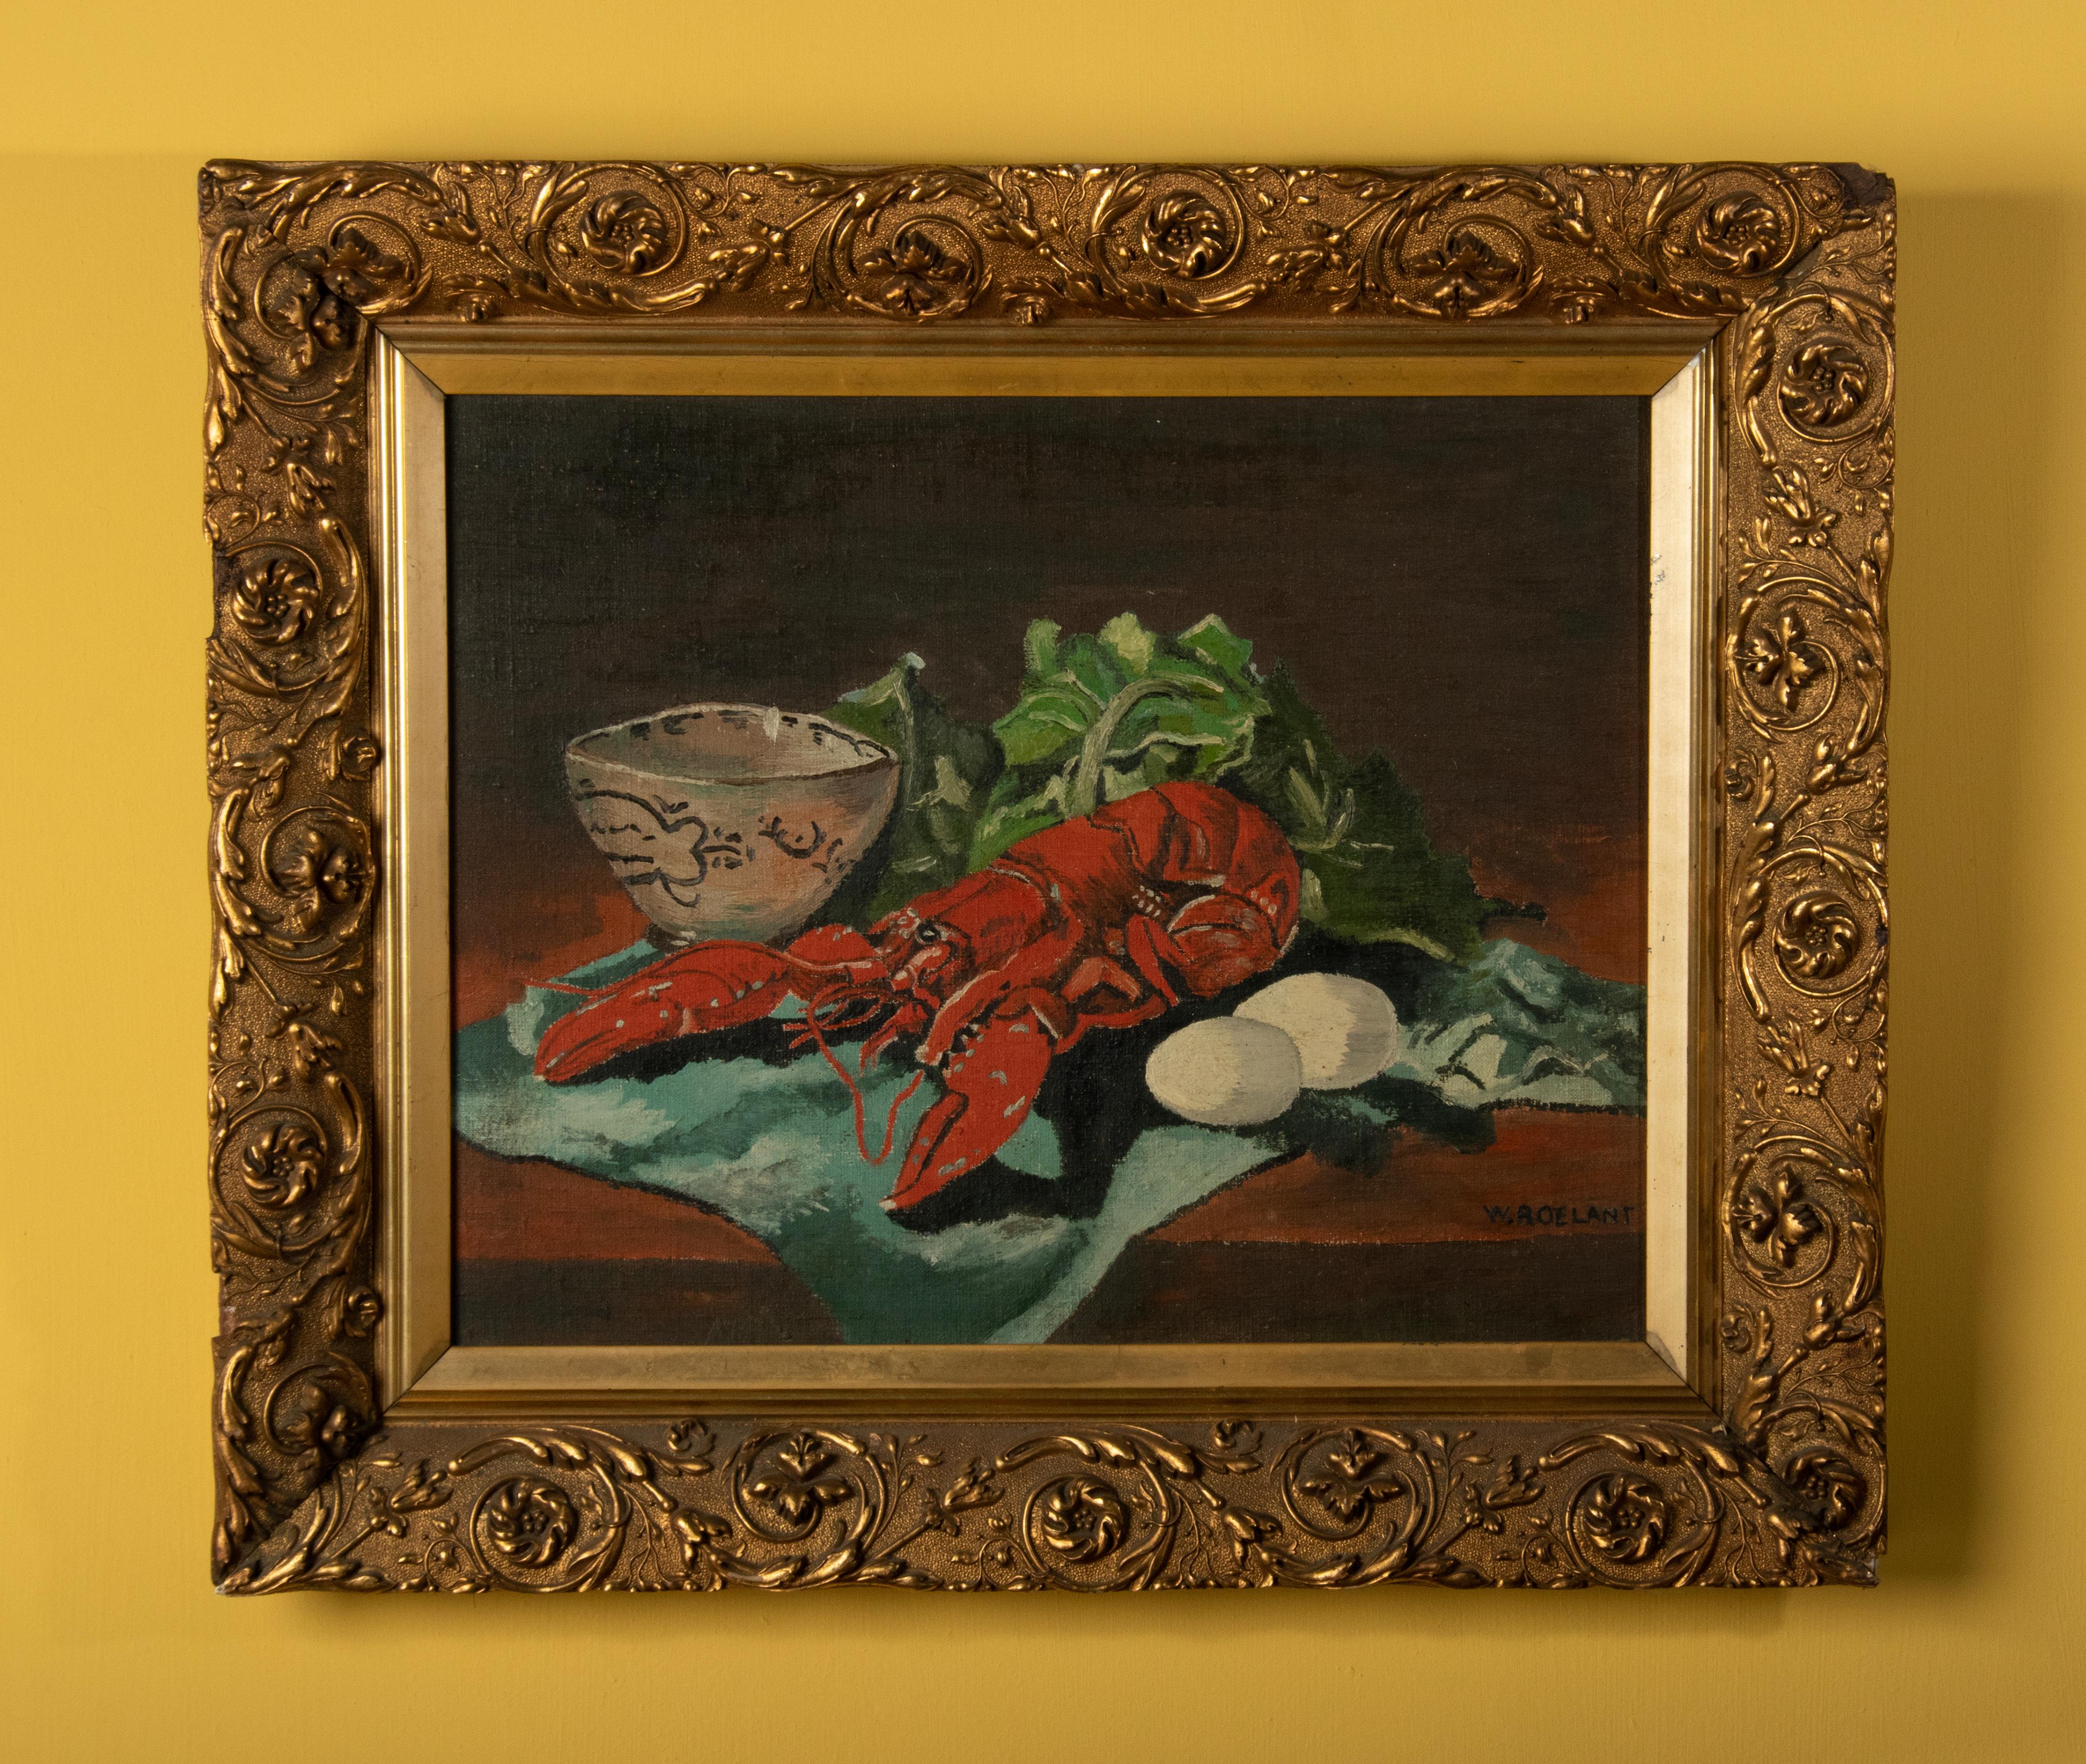 Beautiful and attractive painting in a classic gilded frame.
The painting depicts a still life with lobster, cabbage and eggs. It is oil on canvas. The painting is signed at the bottom right W. Roelant. This is not a well-known painter, yet this is